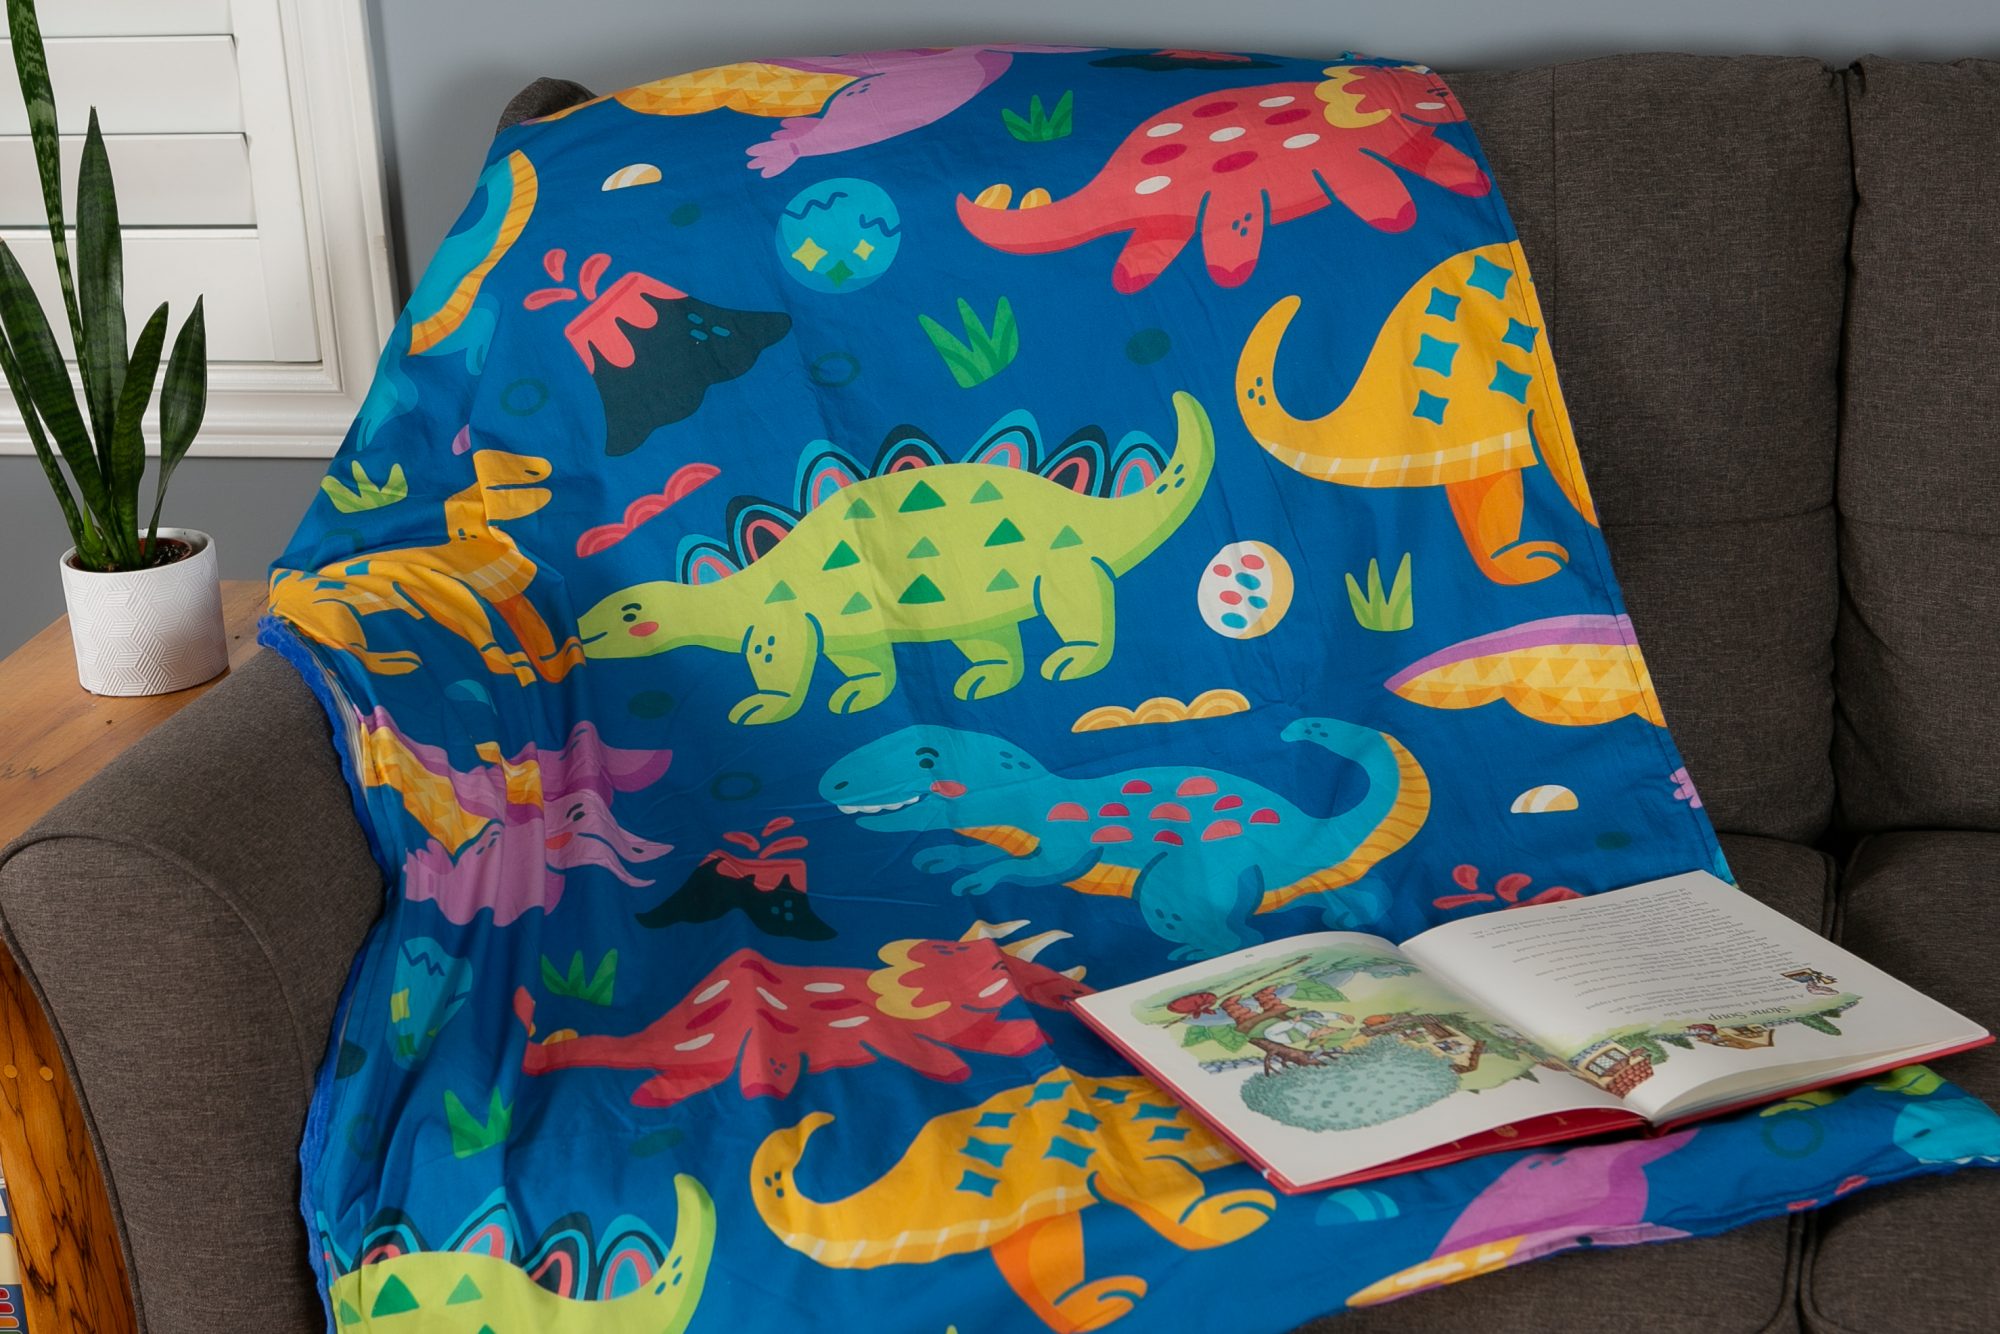 There's Still Time to Contribute to the ZOALA Kid's Weighted Blanket ...